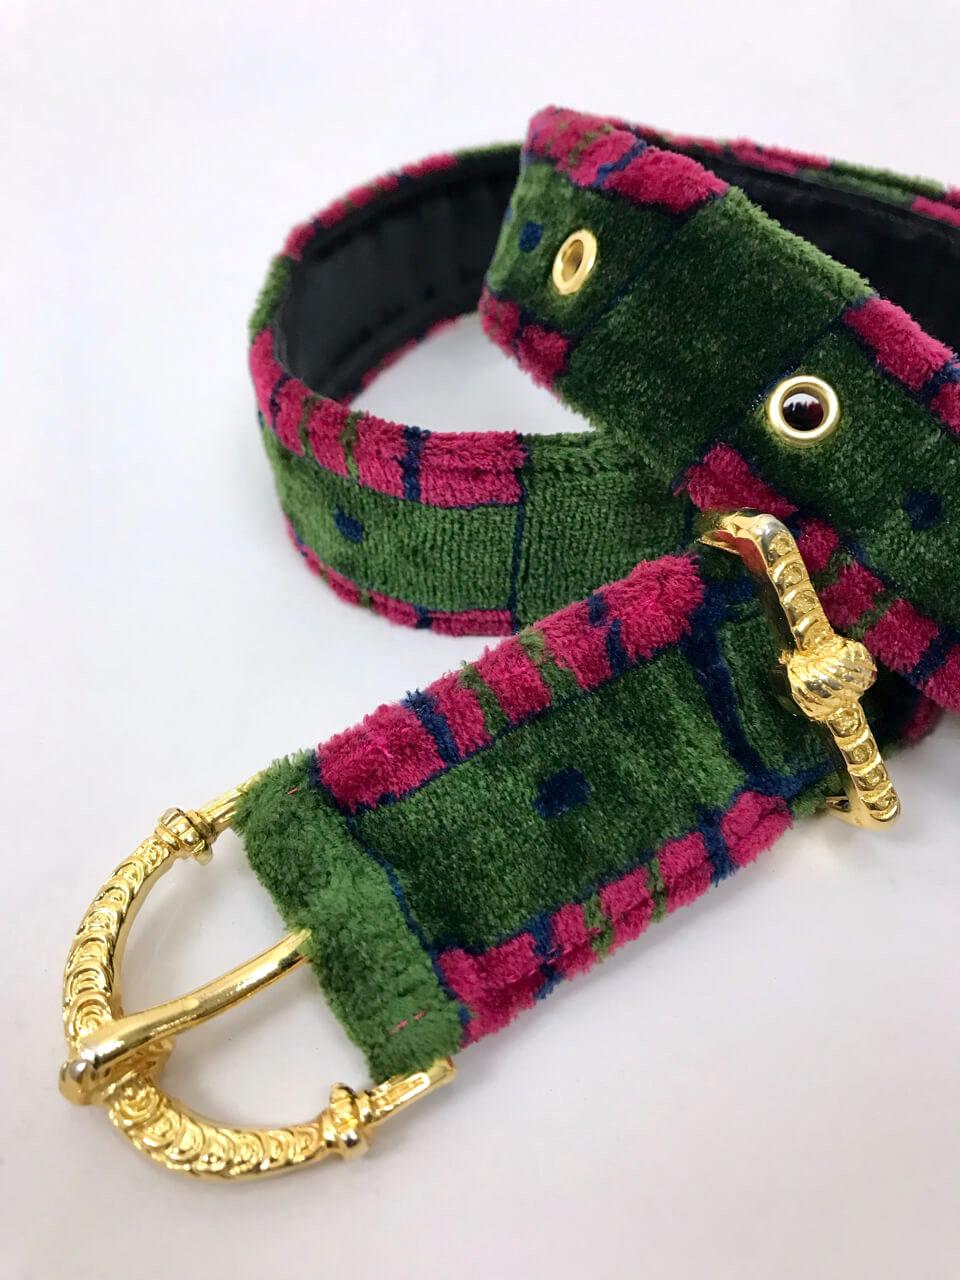 Stunning extremely rare and collectible 1970s Roberta di Camerino trompe l'oeil belt. The plush velvet waist belt features the iconic belt illusion print in Roberta di Camerino's signature colouring of bottle green, raspberry-red and navy blue.